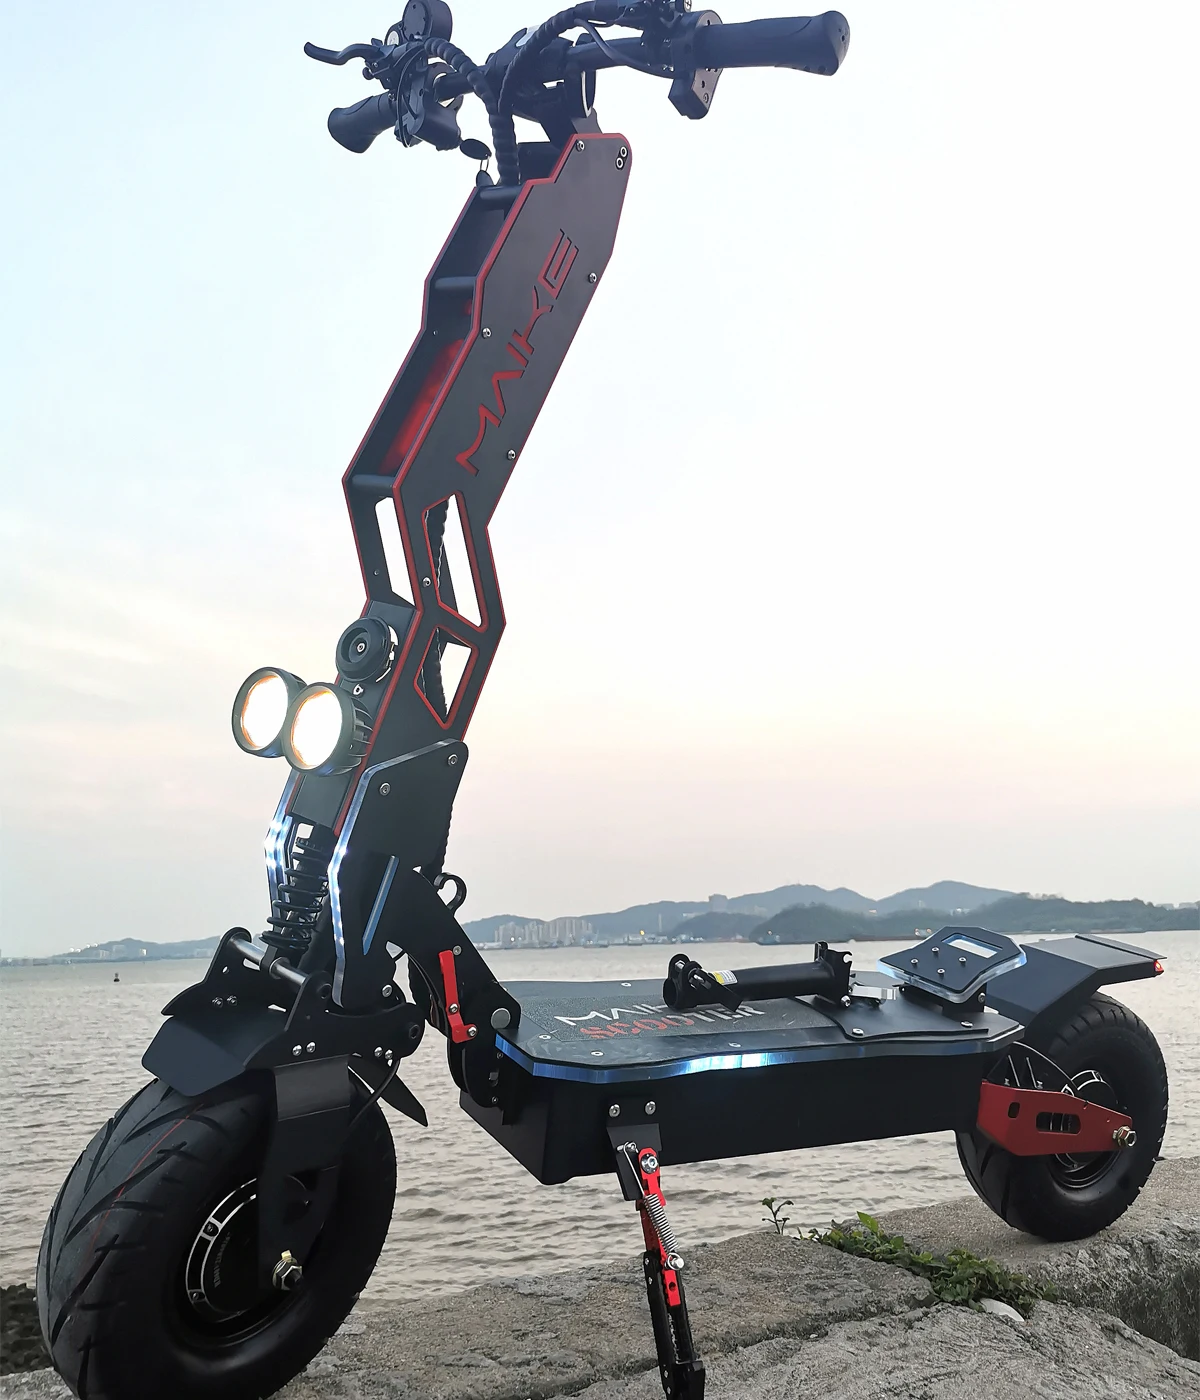 

Maike MKS black Friday fat tire 60V 20ah dual lang range offroad 13 inch foldable electric scooter motorcycle for adult